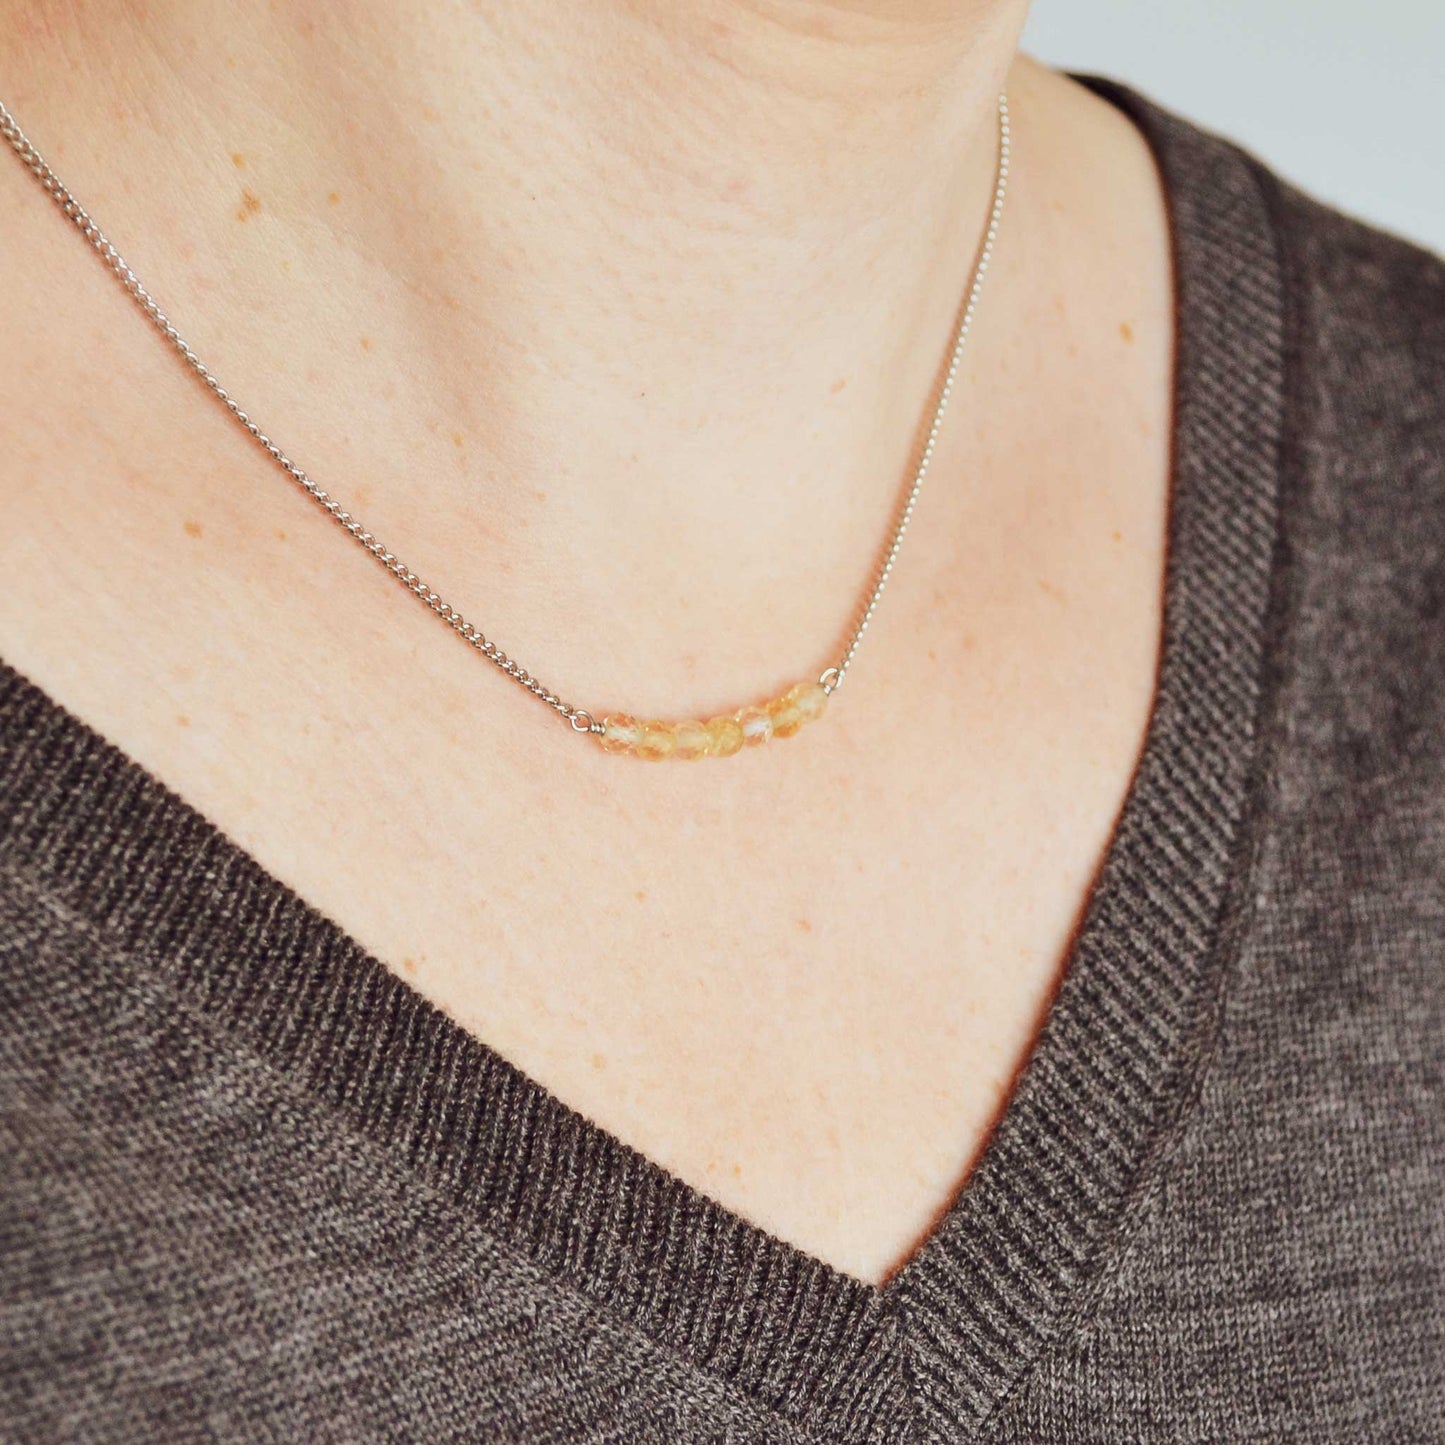 Woman wearing grey v neck jumper and dainty yellow Citrine crystal necklace